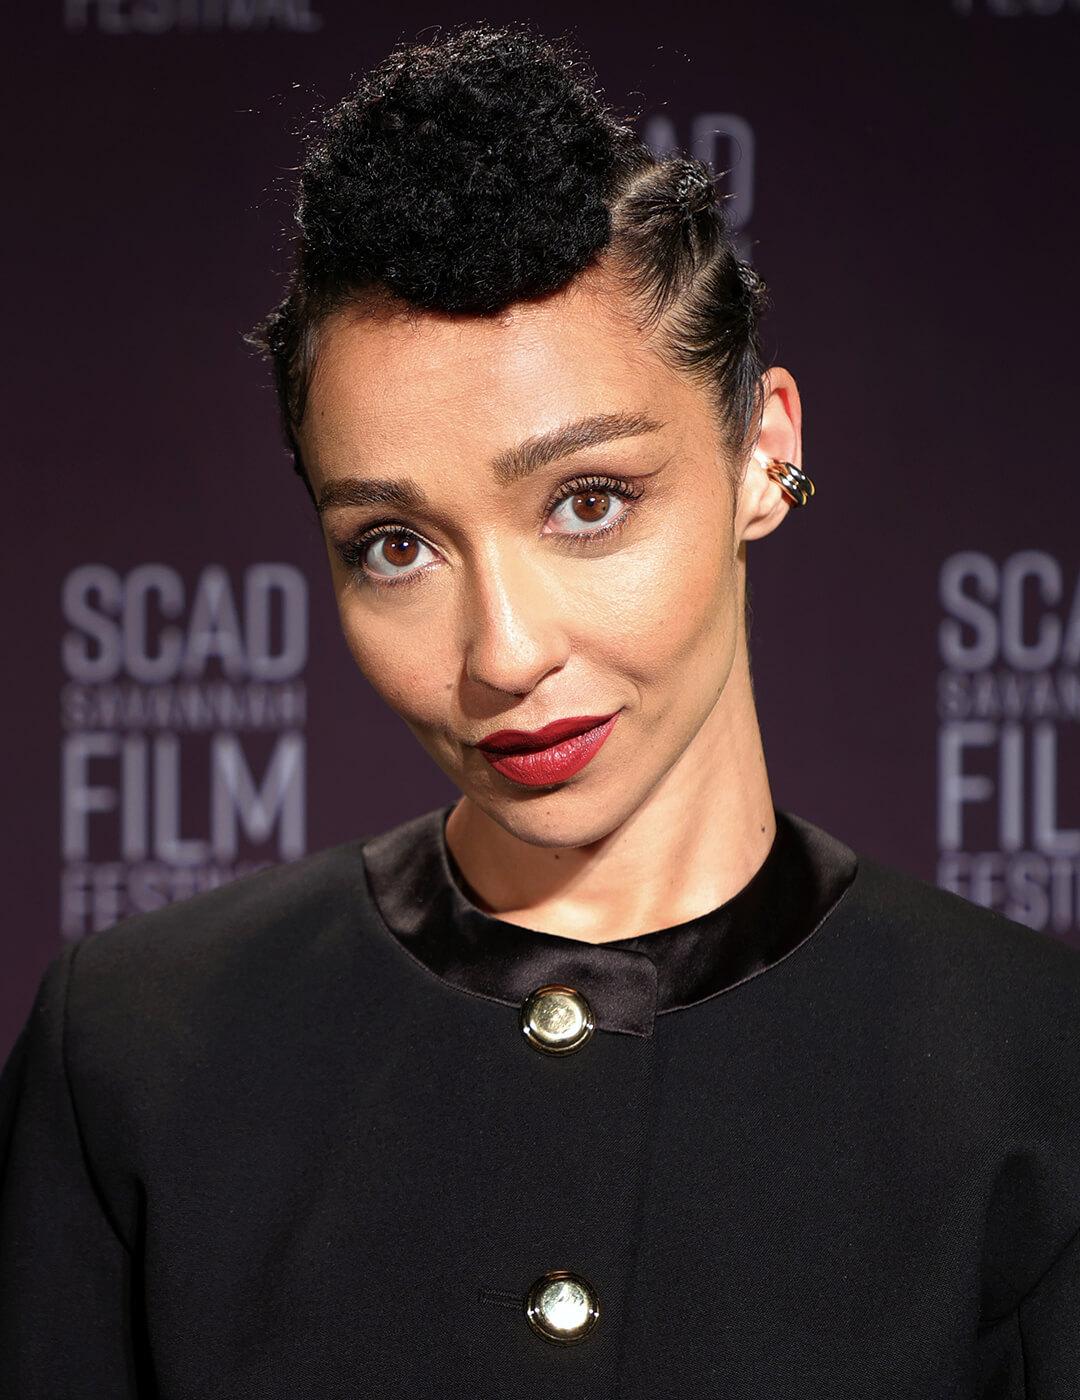 Ruth Negga rocking side corn rows with top know hairstyle